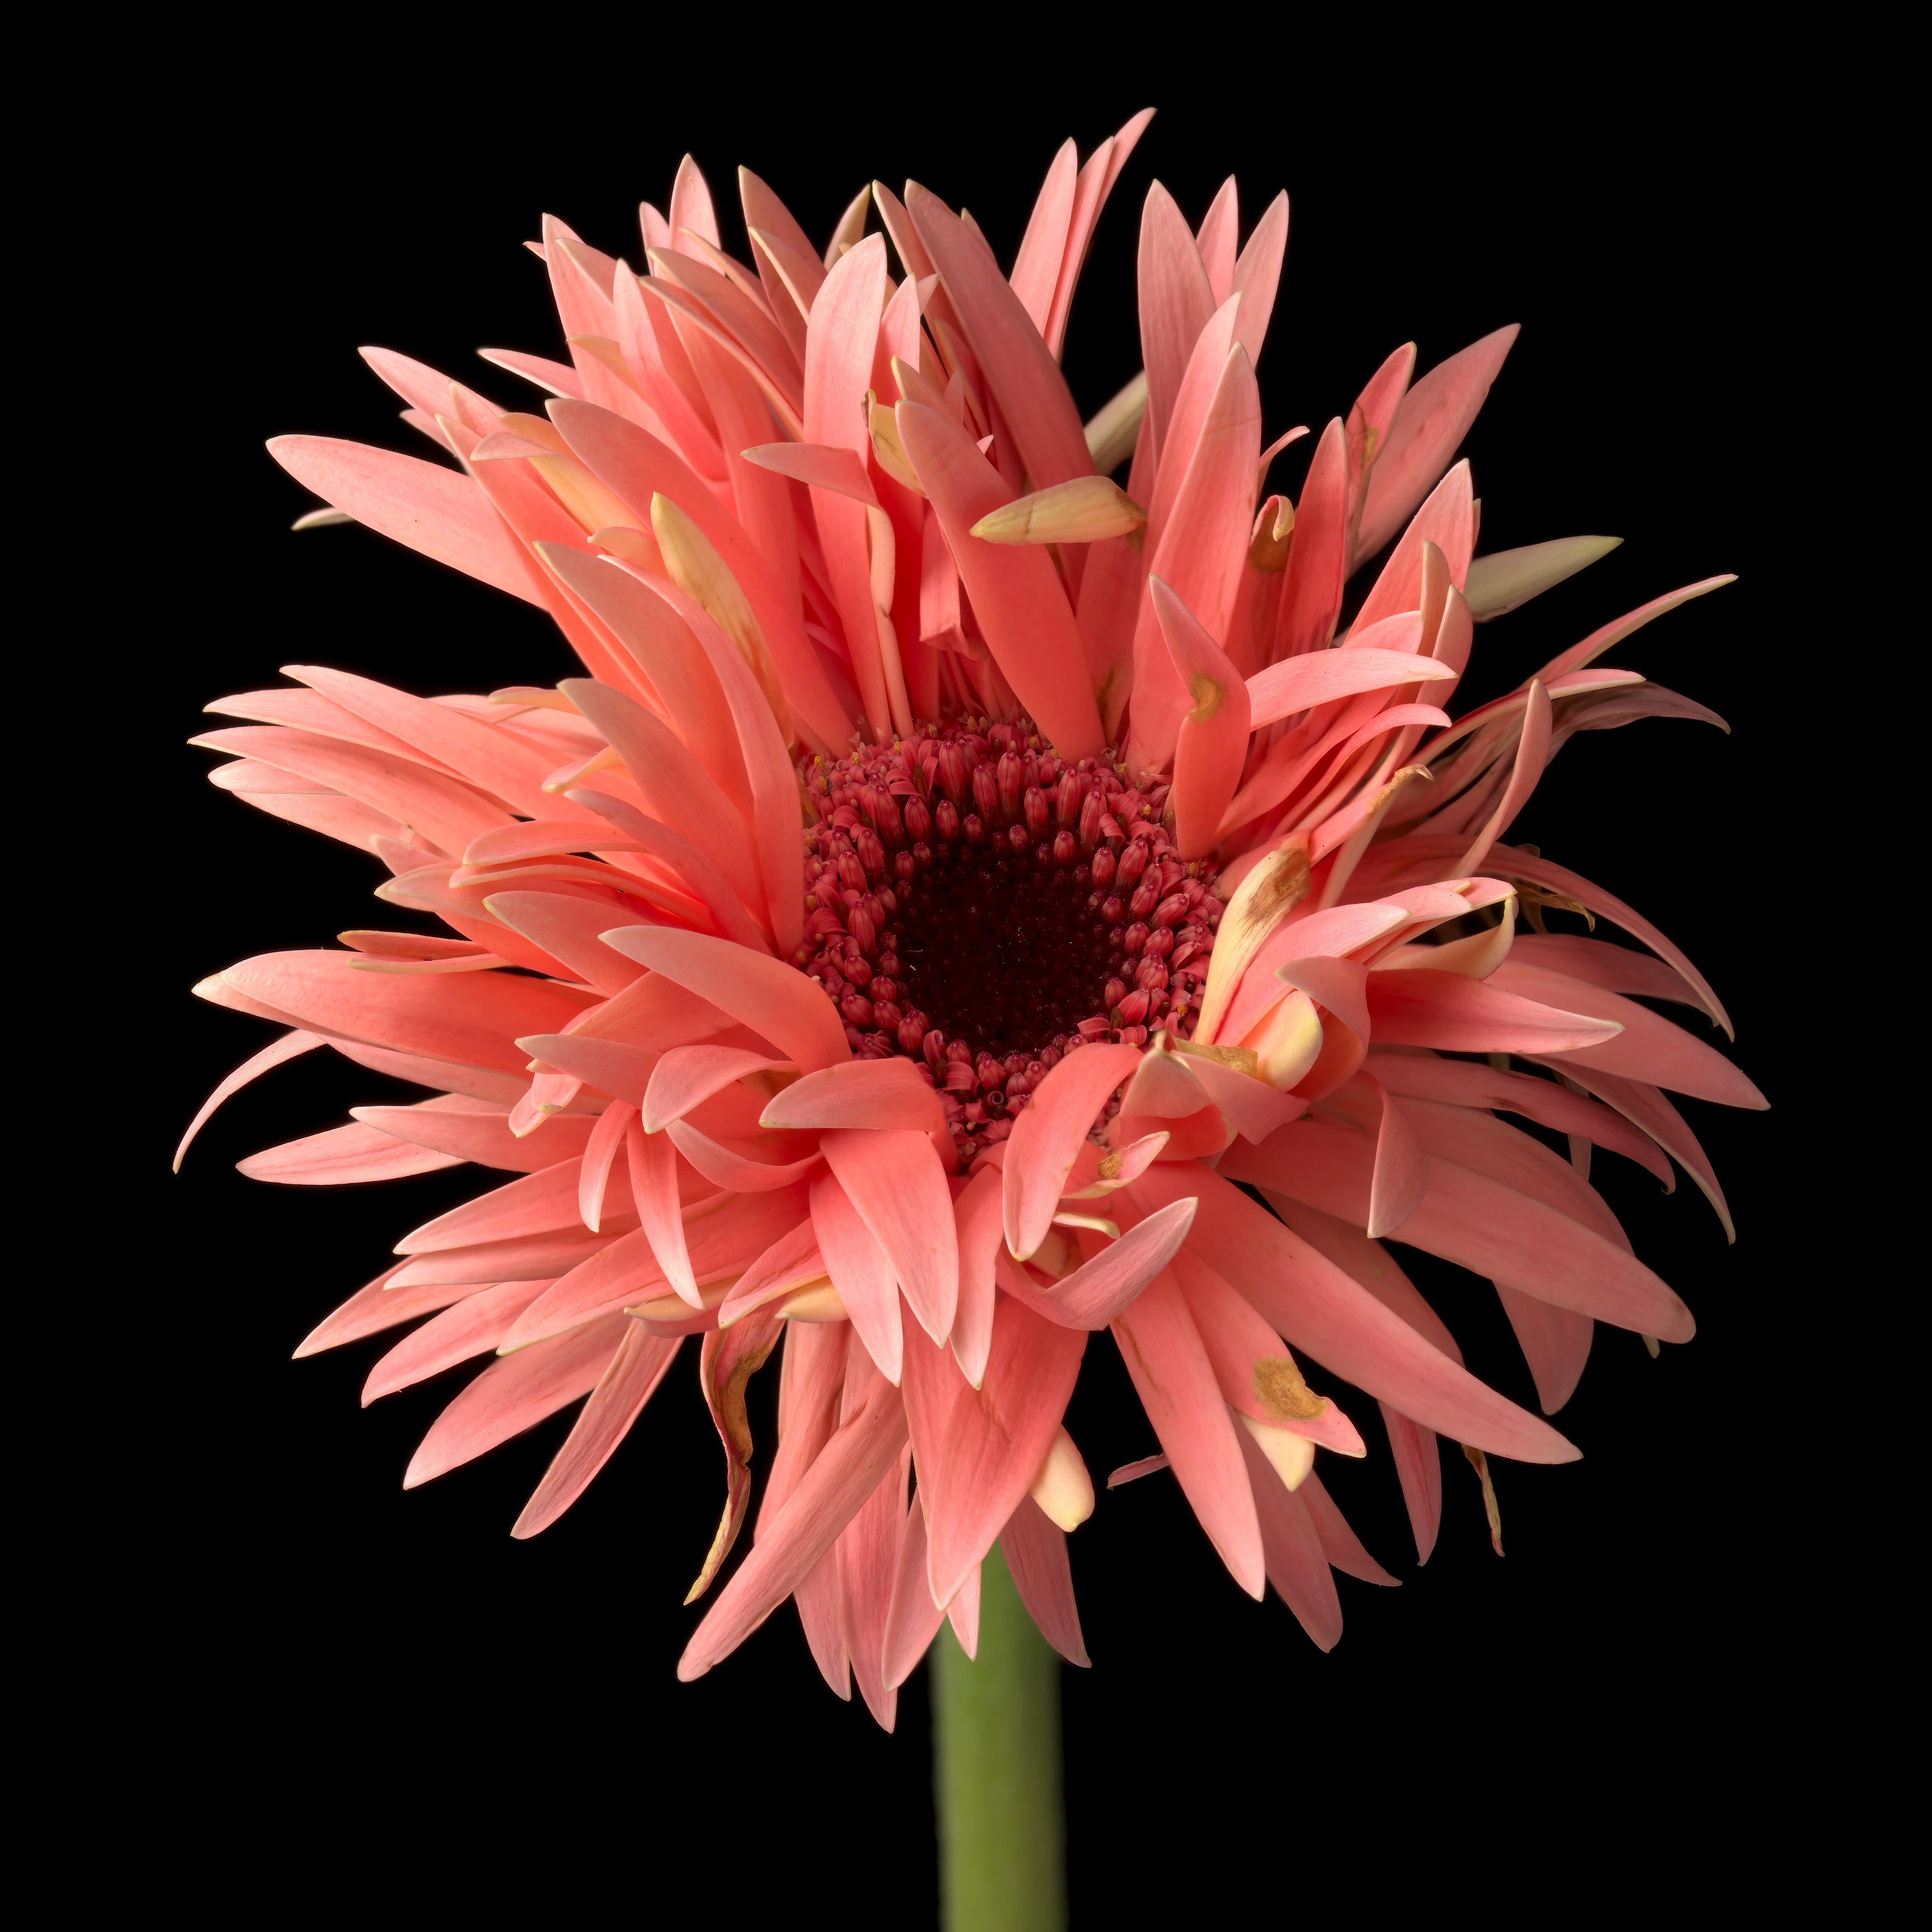 Gerber Daisy 4, archival pigment print photograph, printed on Fine Art paper by Tim Nighswander.  It is 24x24, framed in a white frame to 32x32 with a UV plexiglass.  It is a limited edition of 15, signed and numbered.  It is a vibrant Orange Gerber